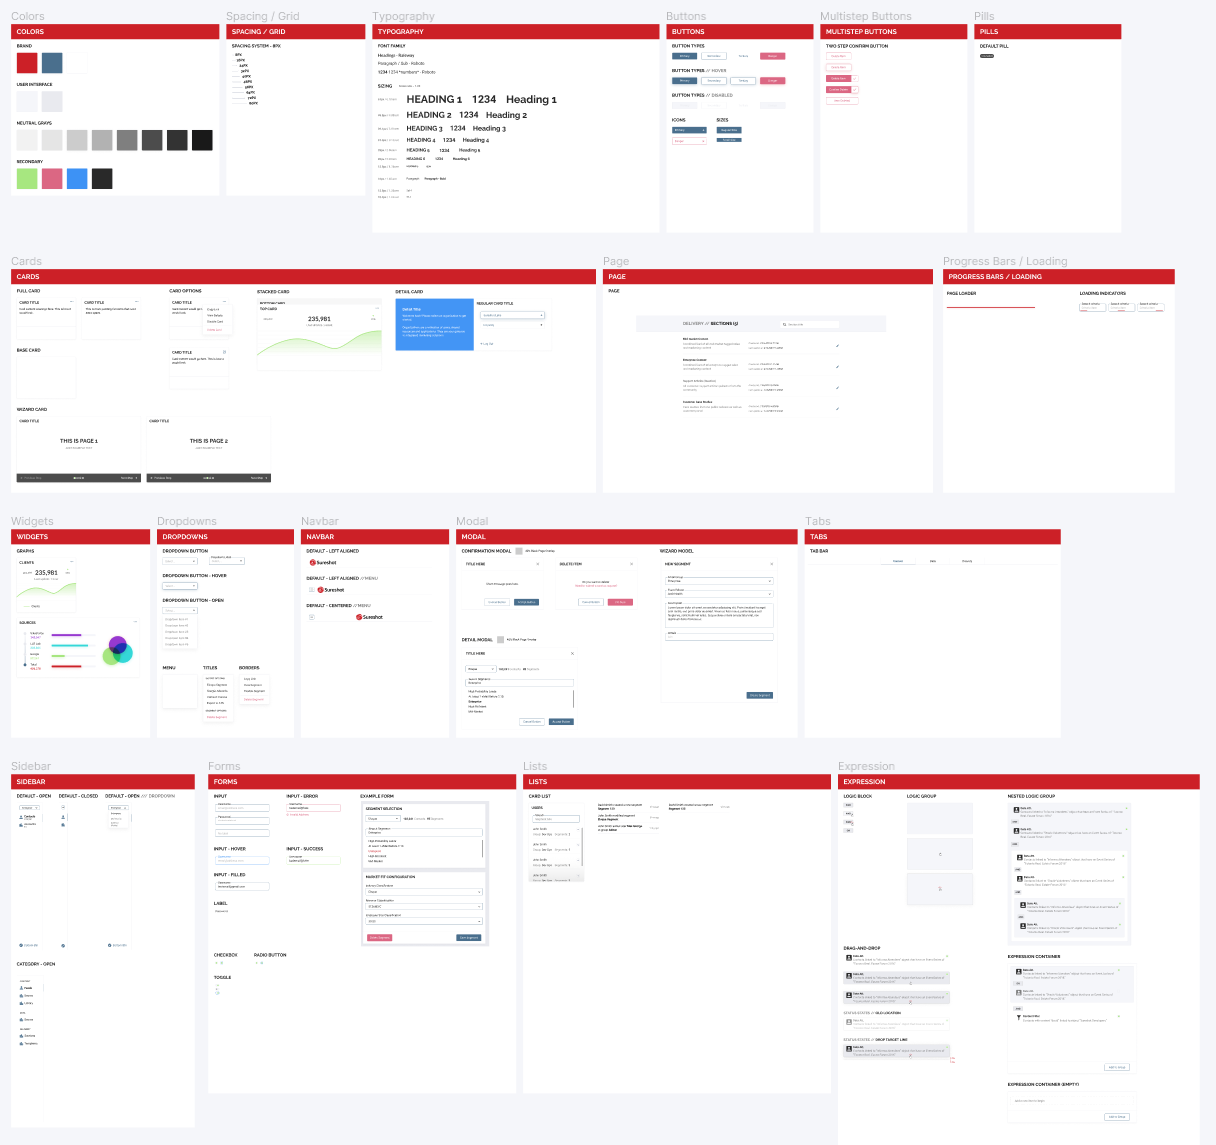 Shown is the Figma file with organized components.